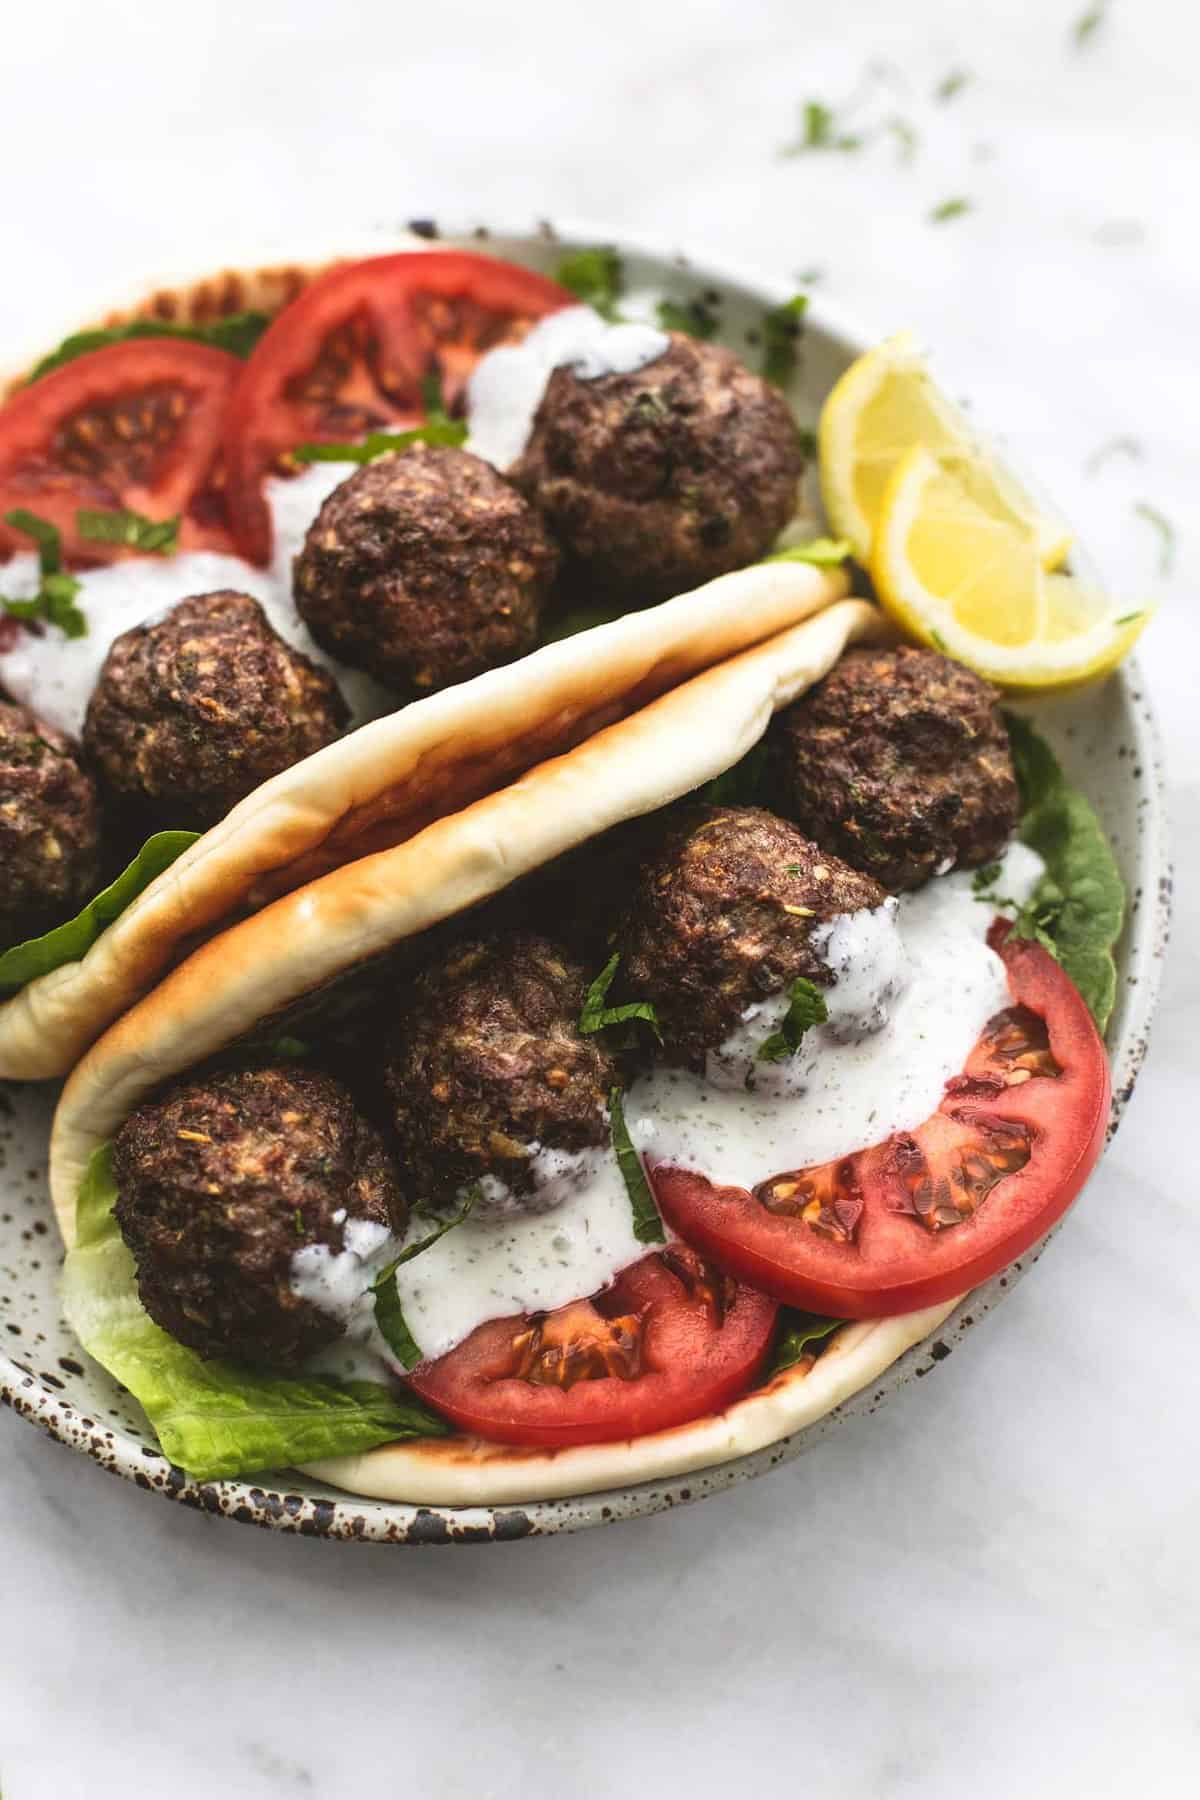 Greek meatballs in slices of flatbread with tomatoes, lettuce and sauce on a plate.